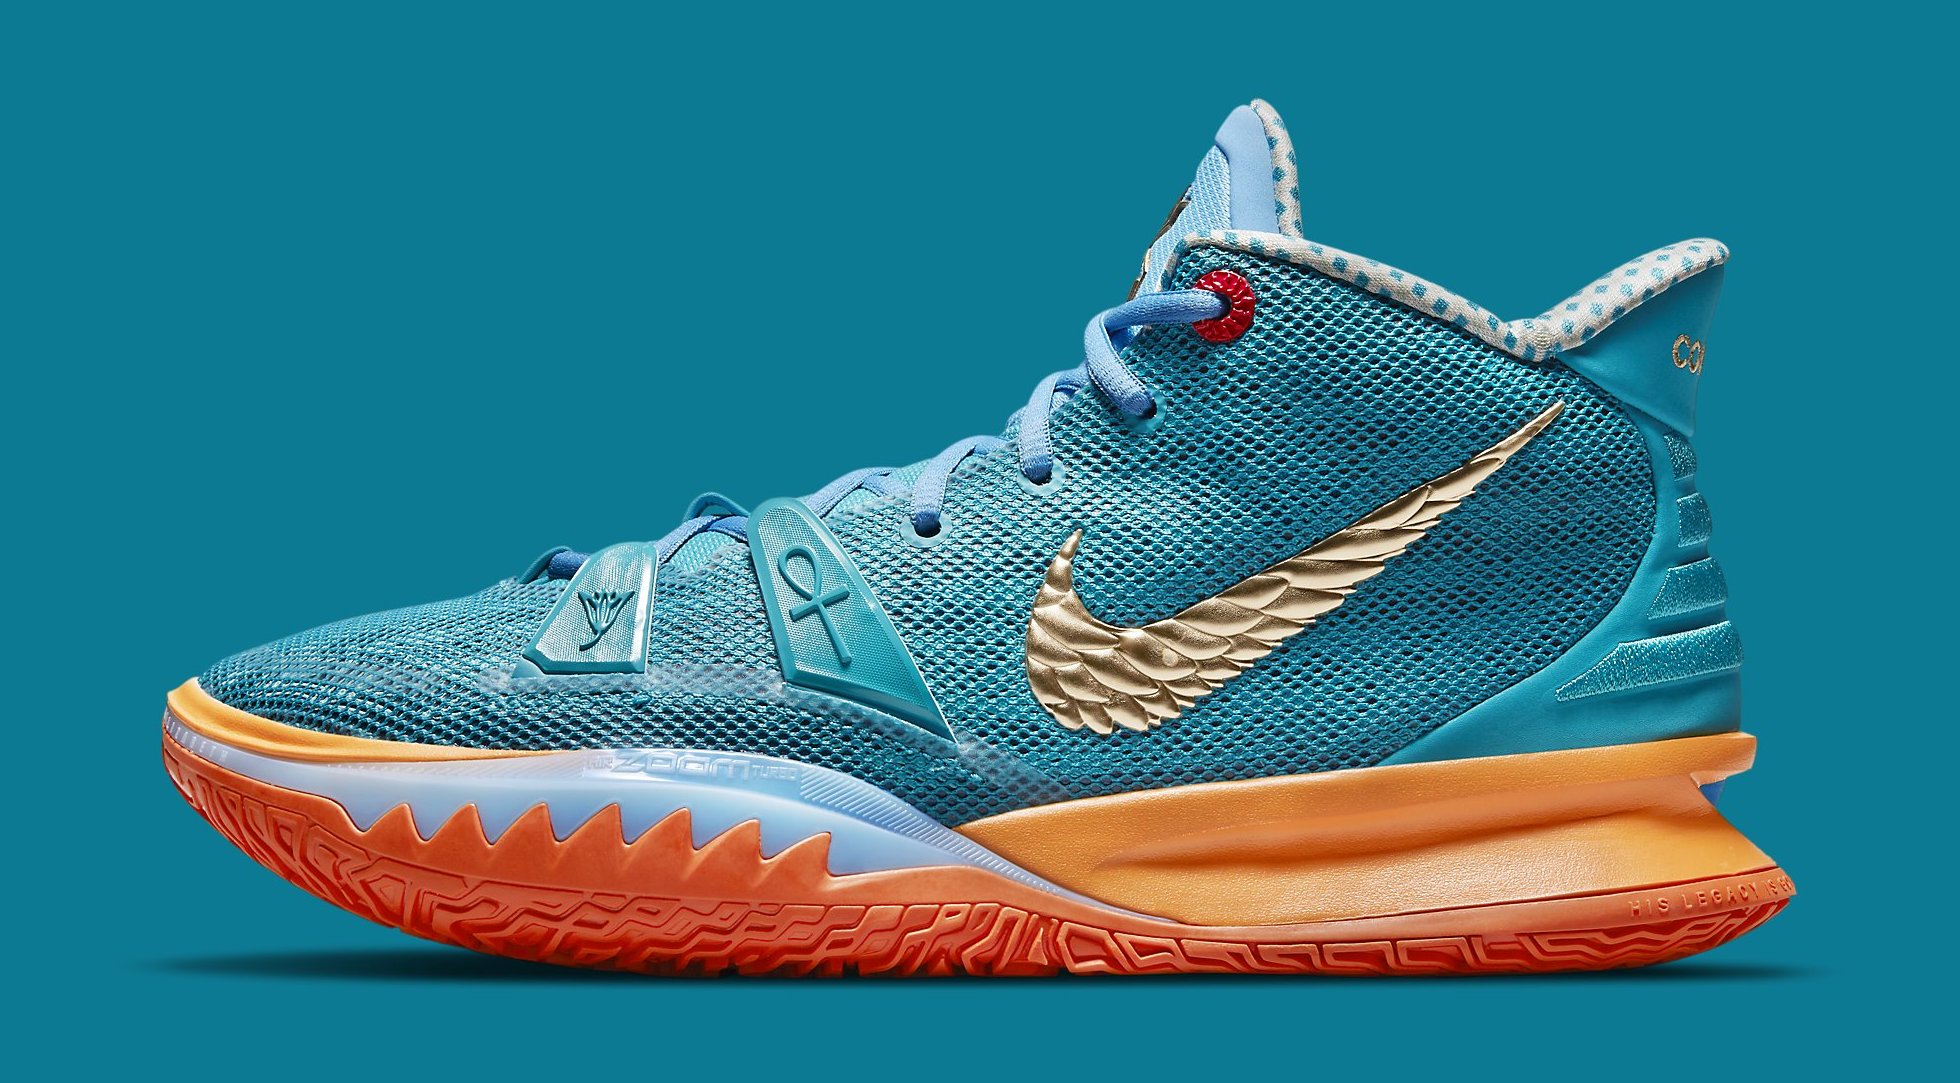 Concepts x Nike Kyrie 7 CT1137 900 Lateral